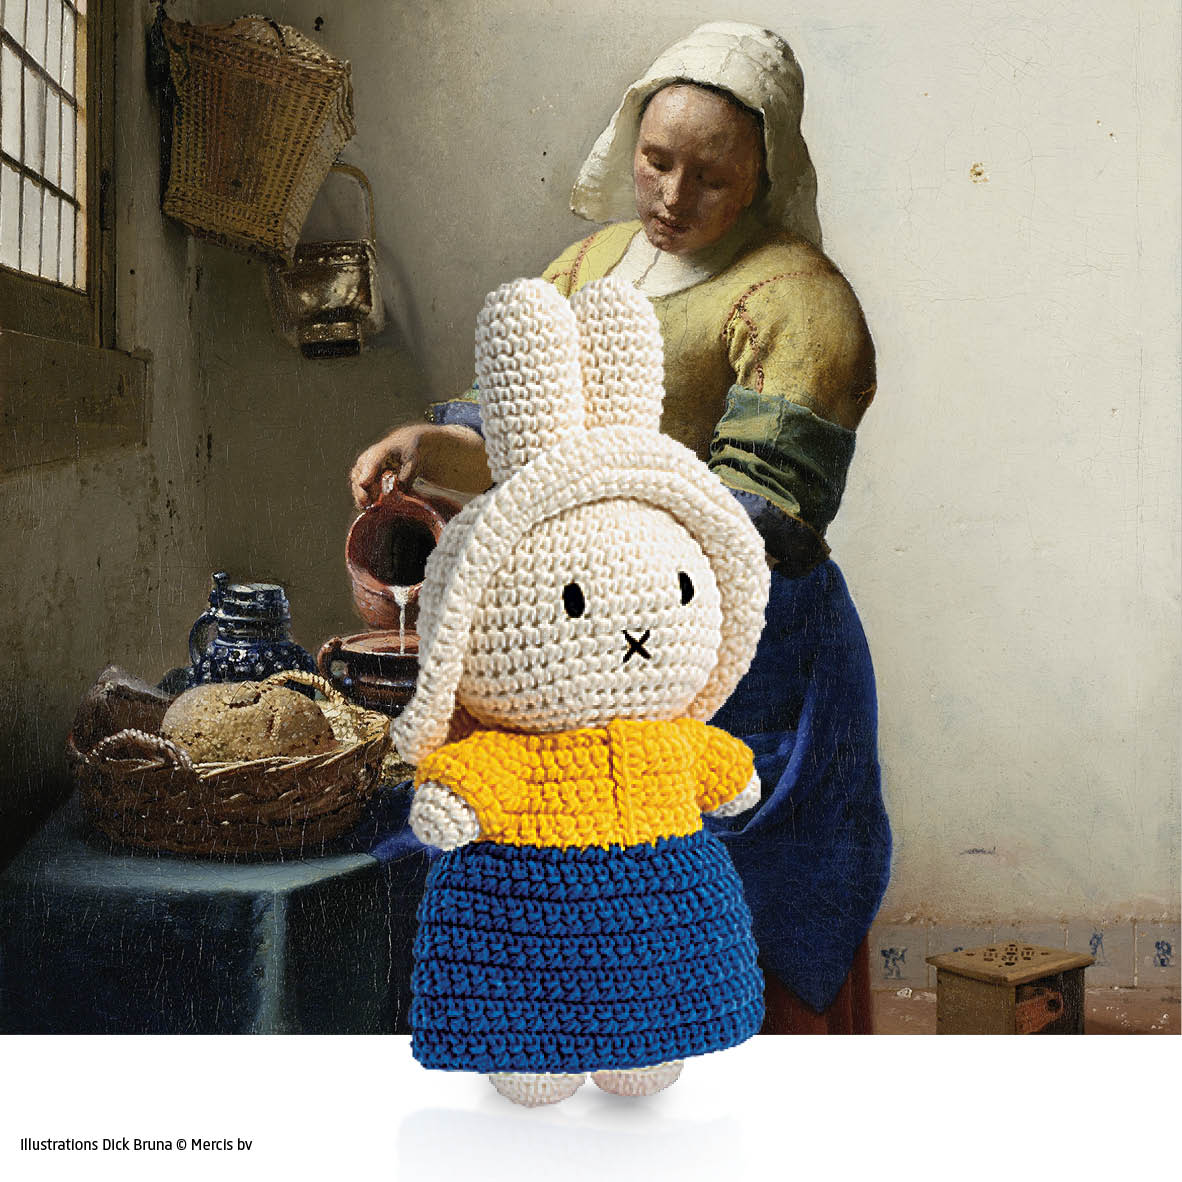 Miffy Handmade Knit Doll with Vermeer-Inspired Dress